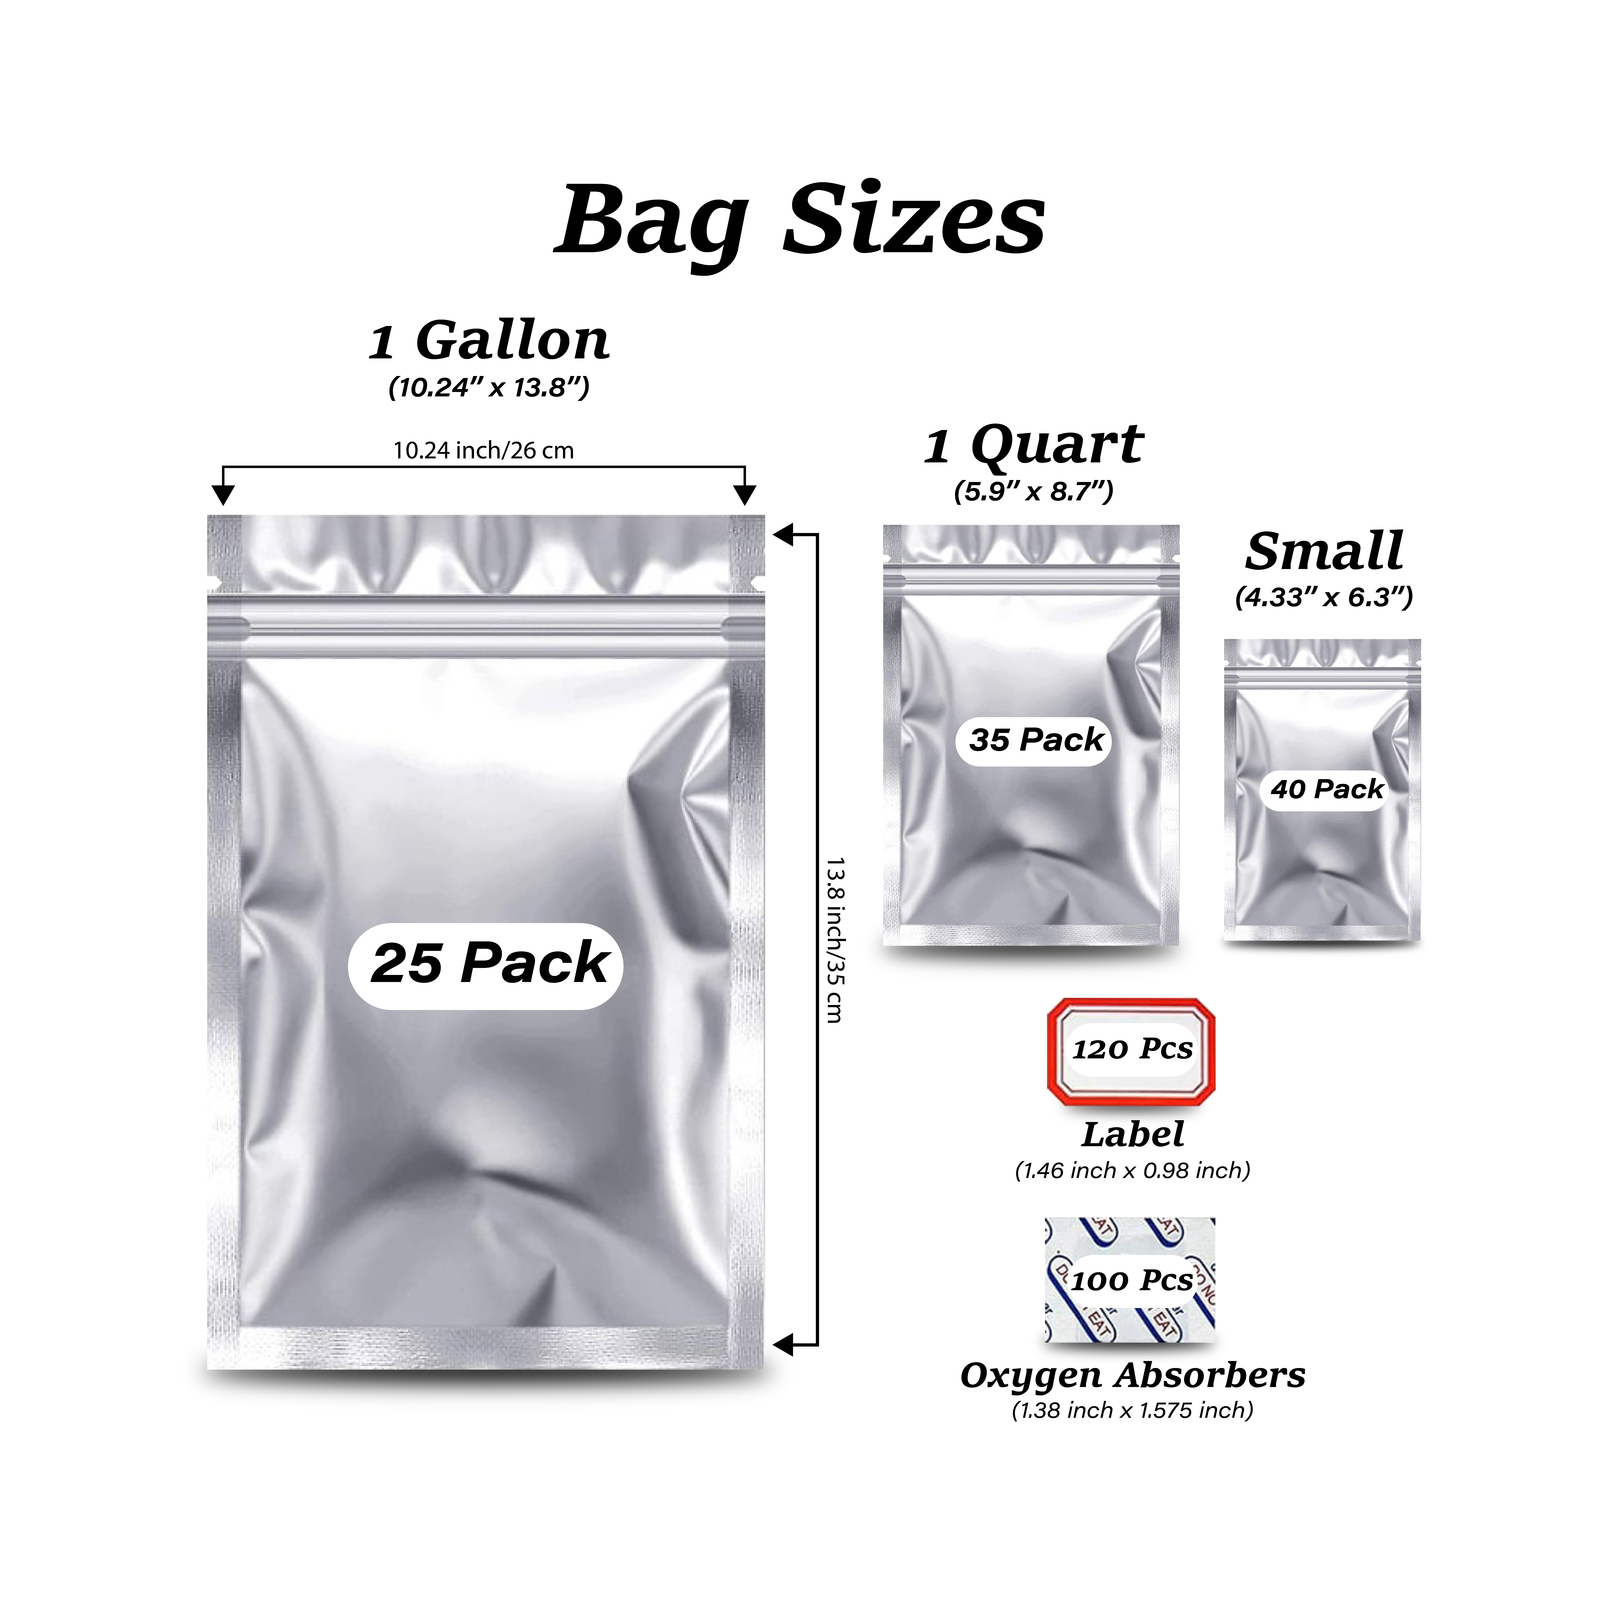 100 Pack Resealable Stand Up Mylar Bags for Food Storage - 4.3x6.3 Inches  Smell Proof